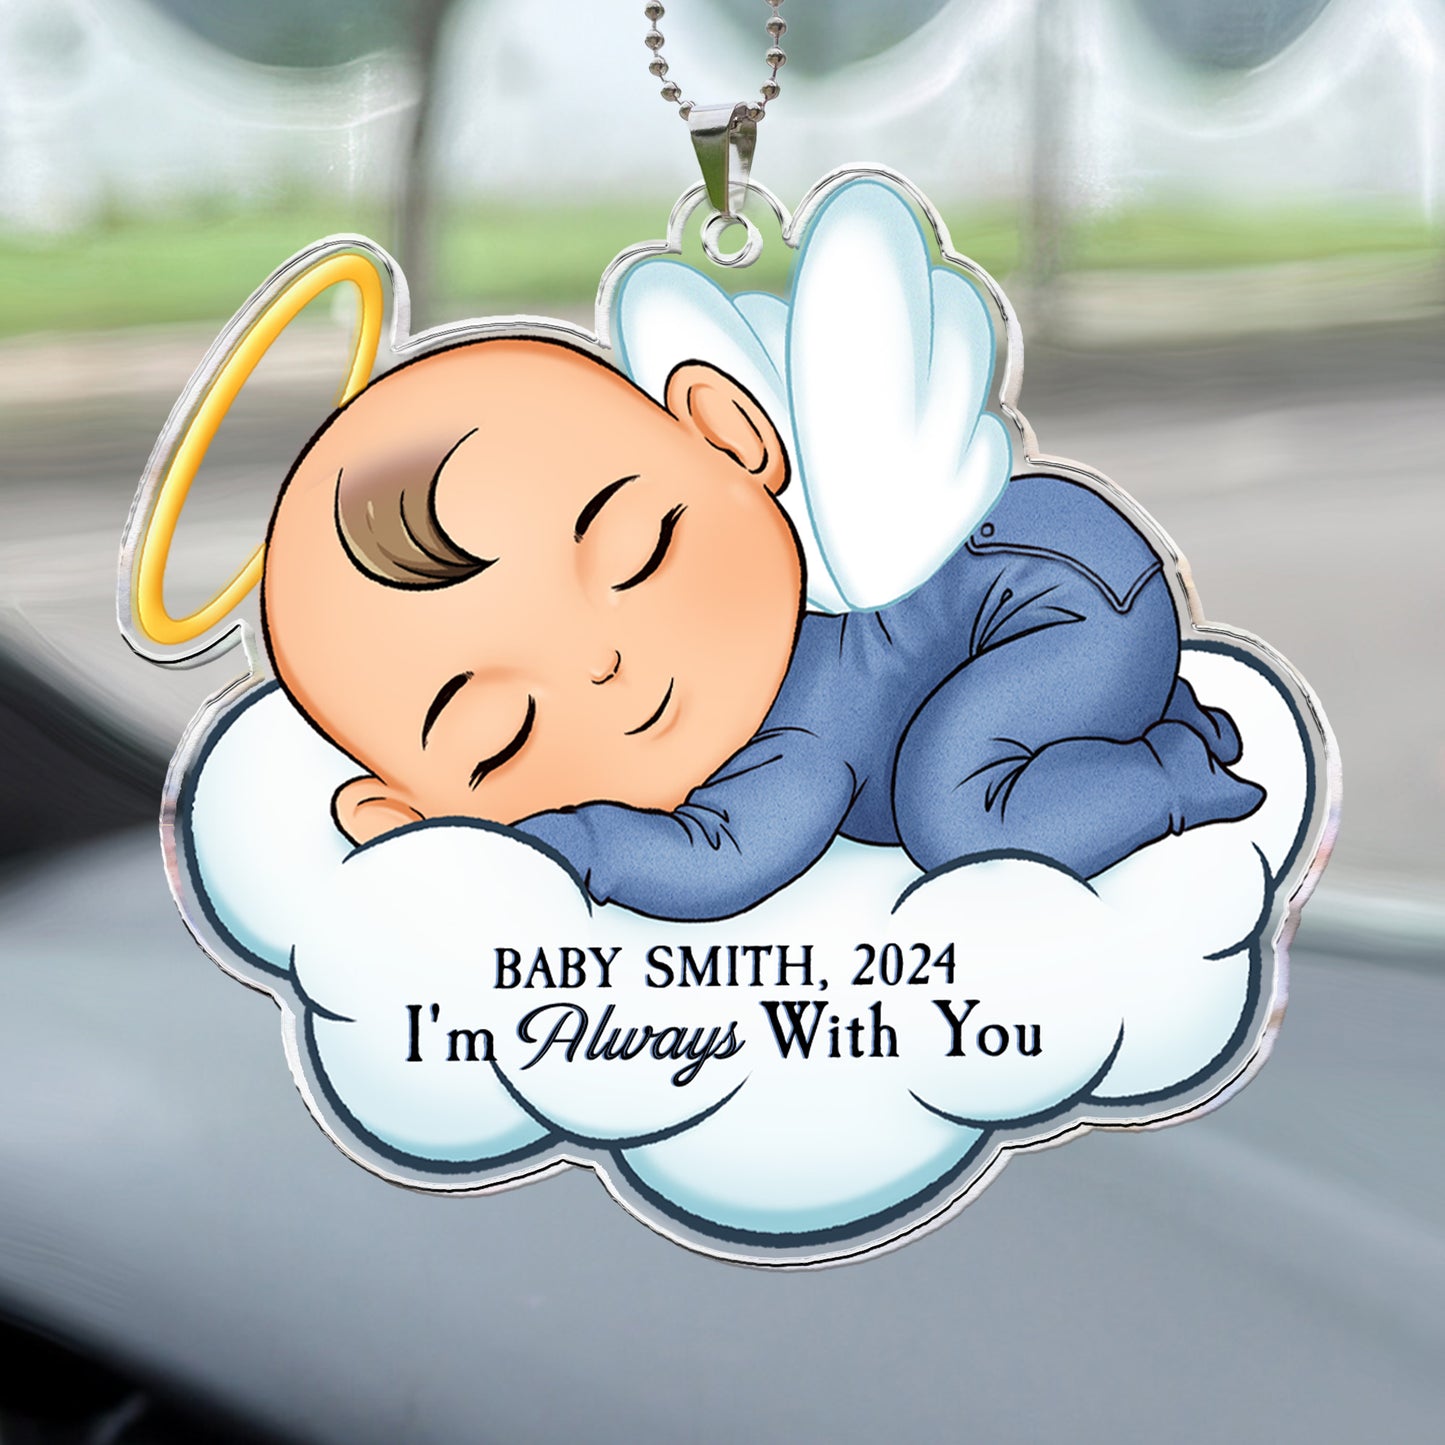 I'm Always With You - Personalized Car Ornament